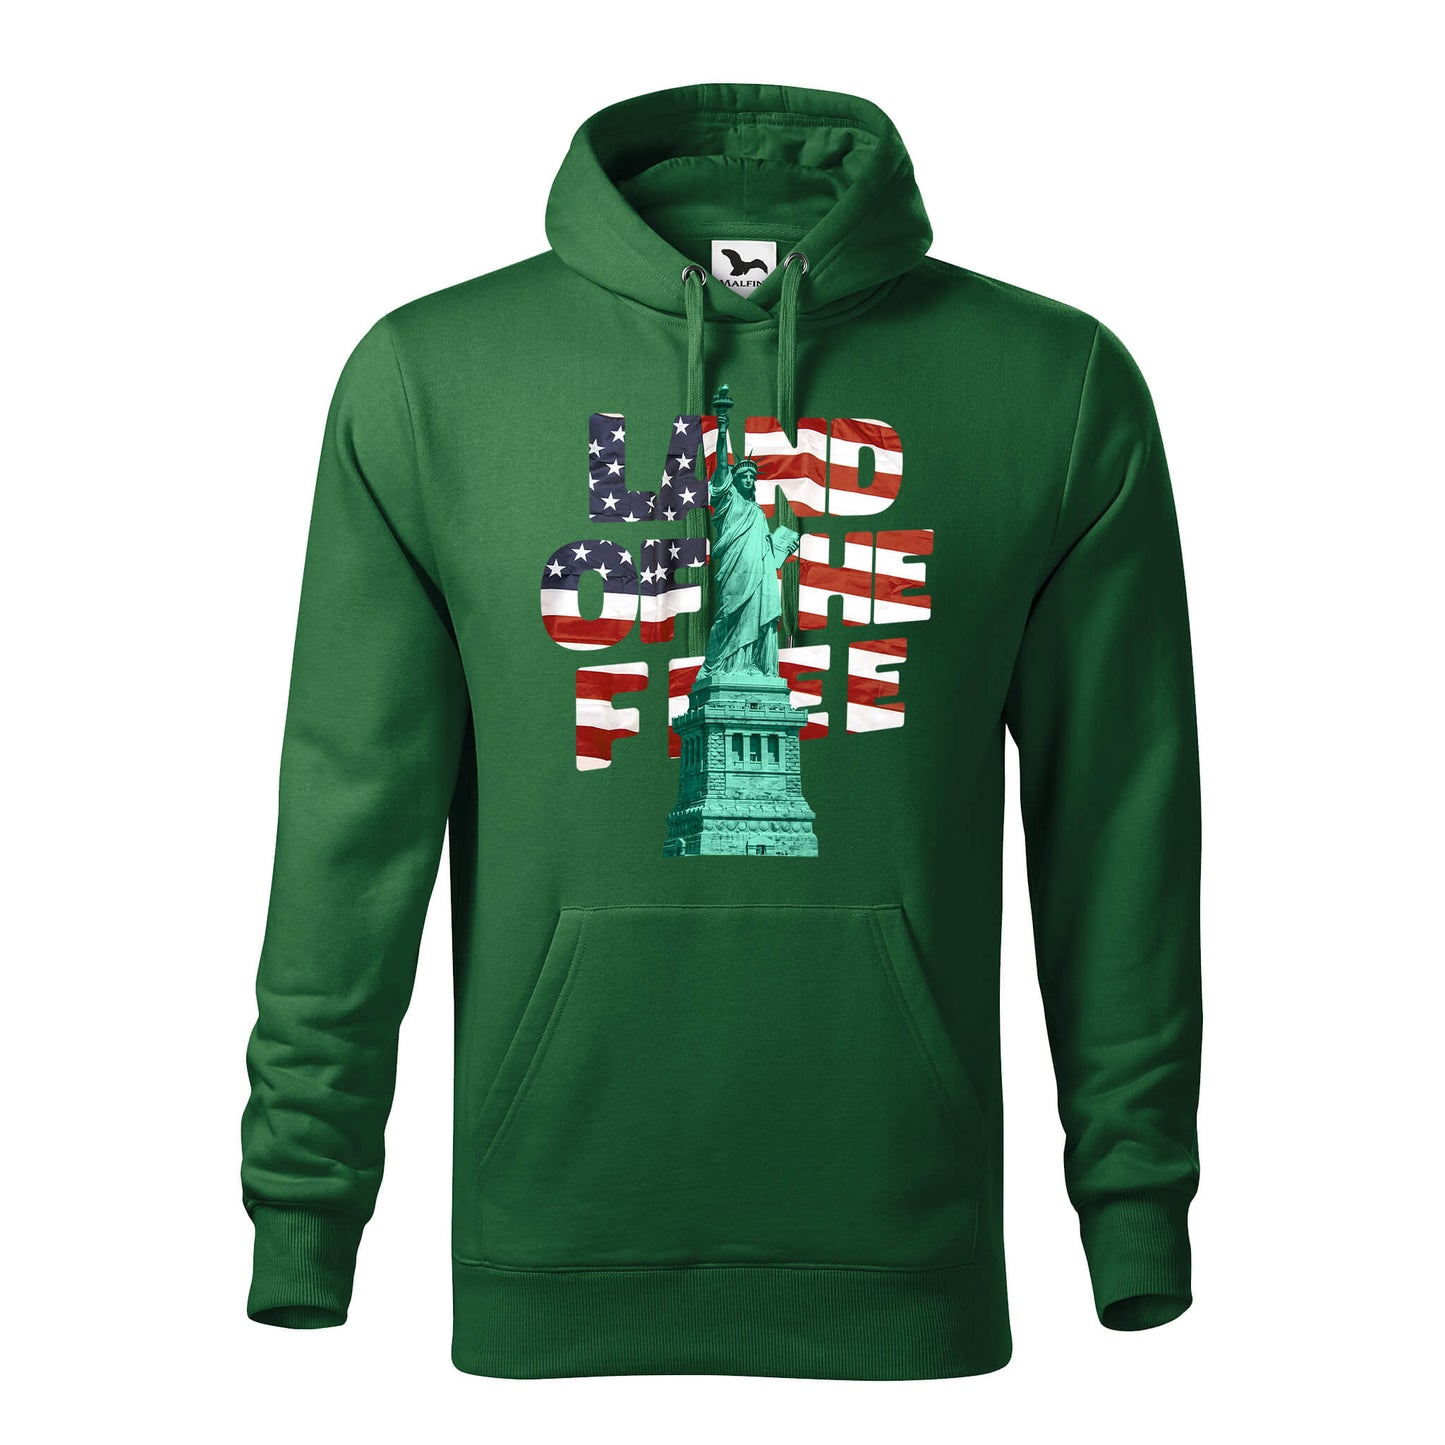 Land of the free hoodie - rvdesignprint